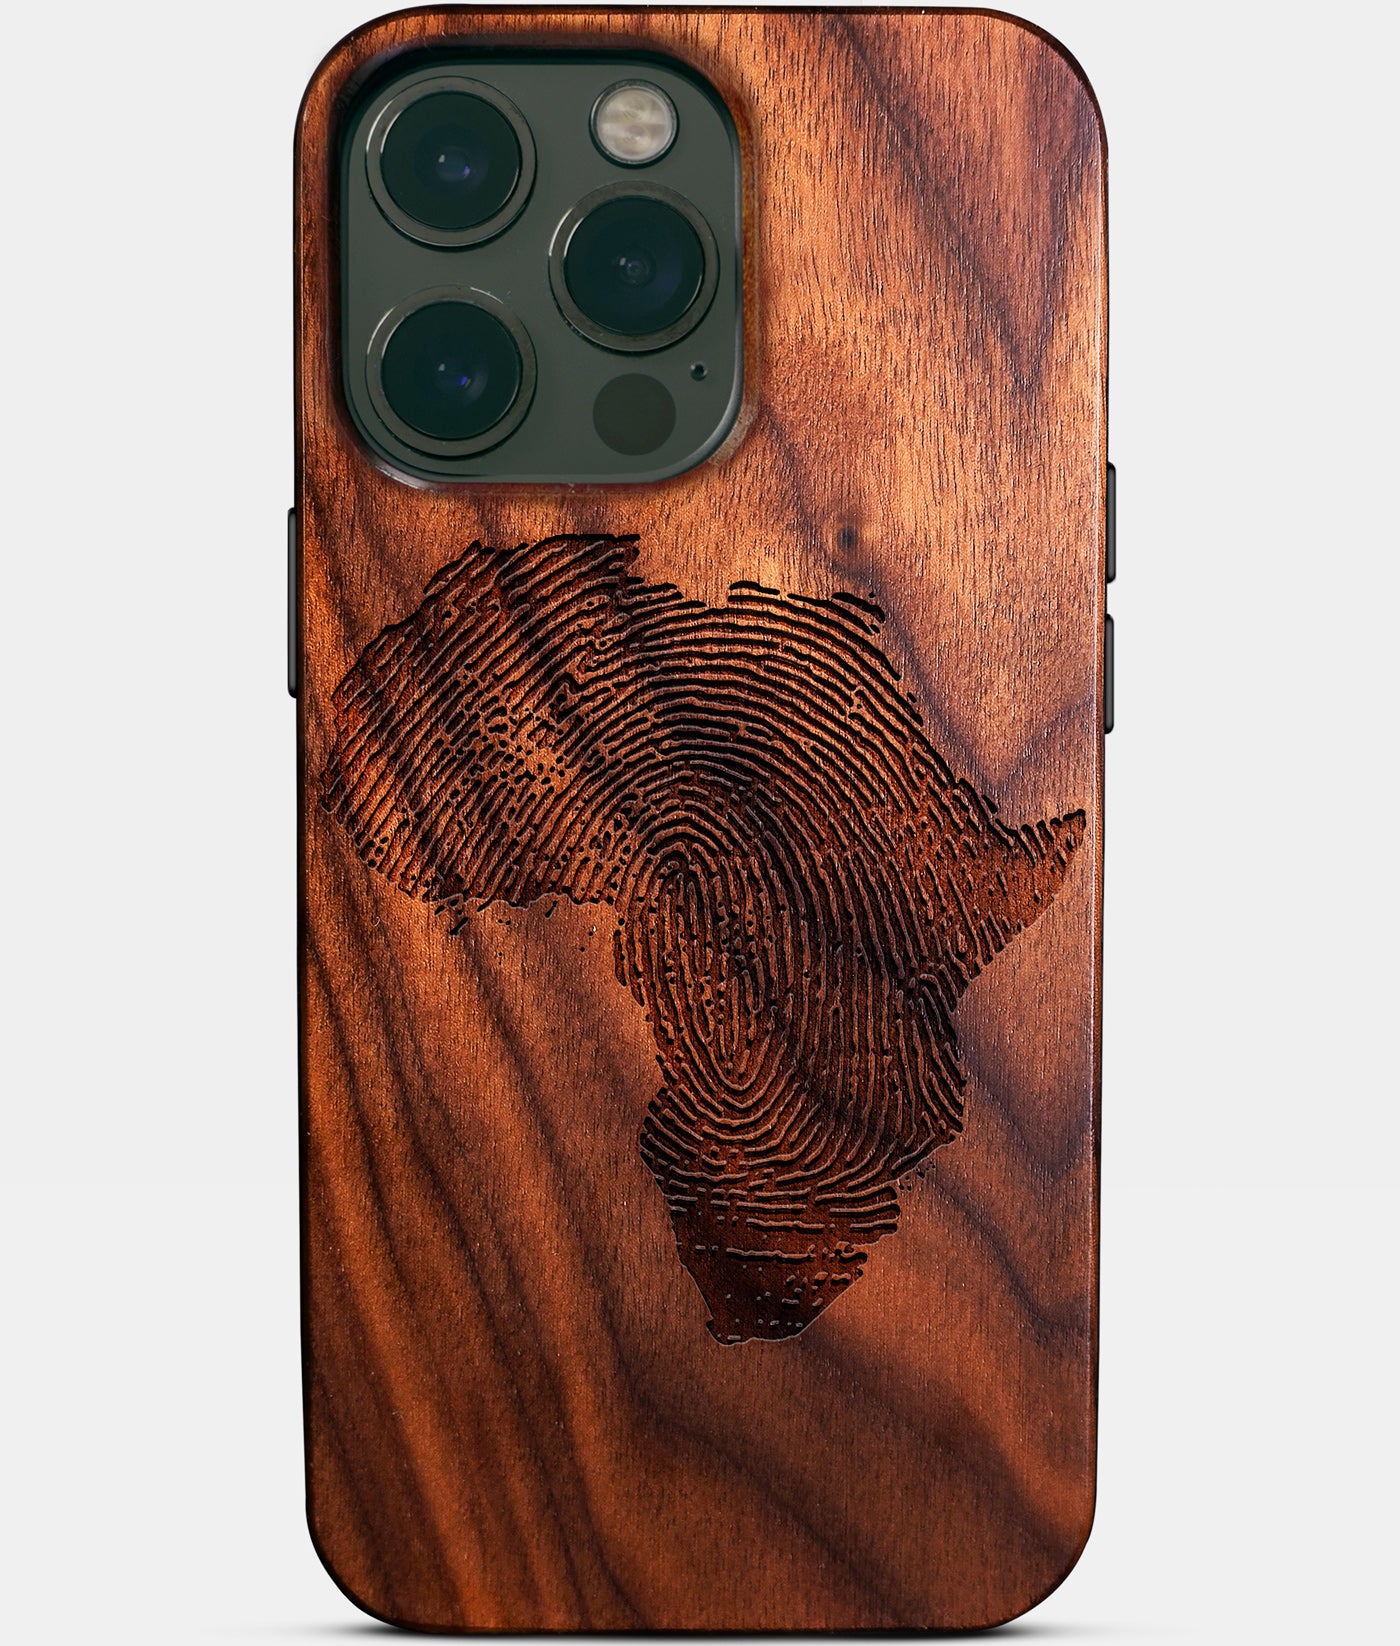 Africa Fingerprint Shape Wood iPhone 14 Pro Max Case - HBCU Gear College Graduation Gifts For Black Men And Women Black Owned Gifts 2022 Christmas Gifts - African American Black Owned Businesses iPhone 14 Pro Max Cover In Los Angeles 2022 Custom Gifts For Personalized Black Men